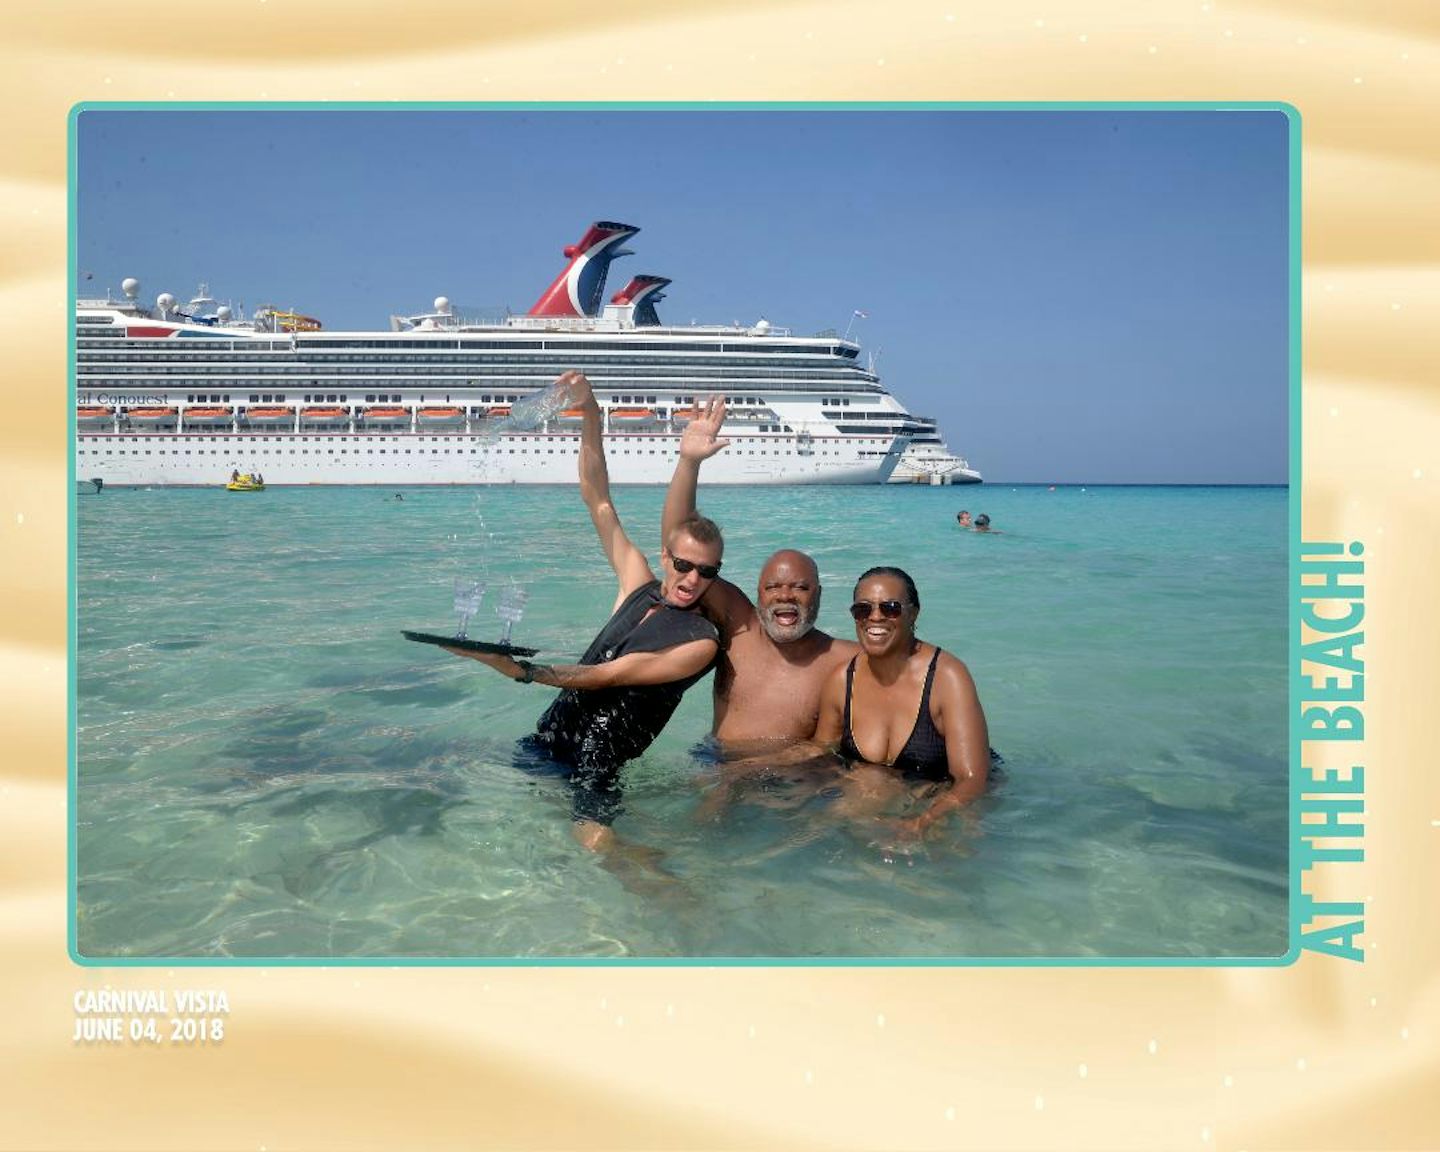 Enjoying the beach at Grand Turk, w/ one one crazy member of the crew, lol.